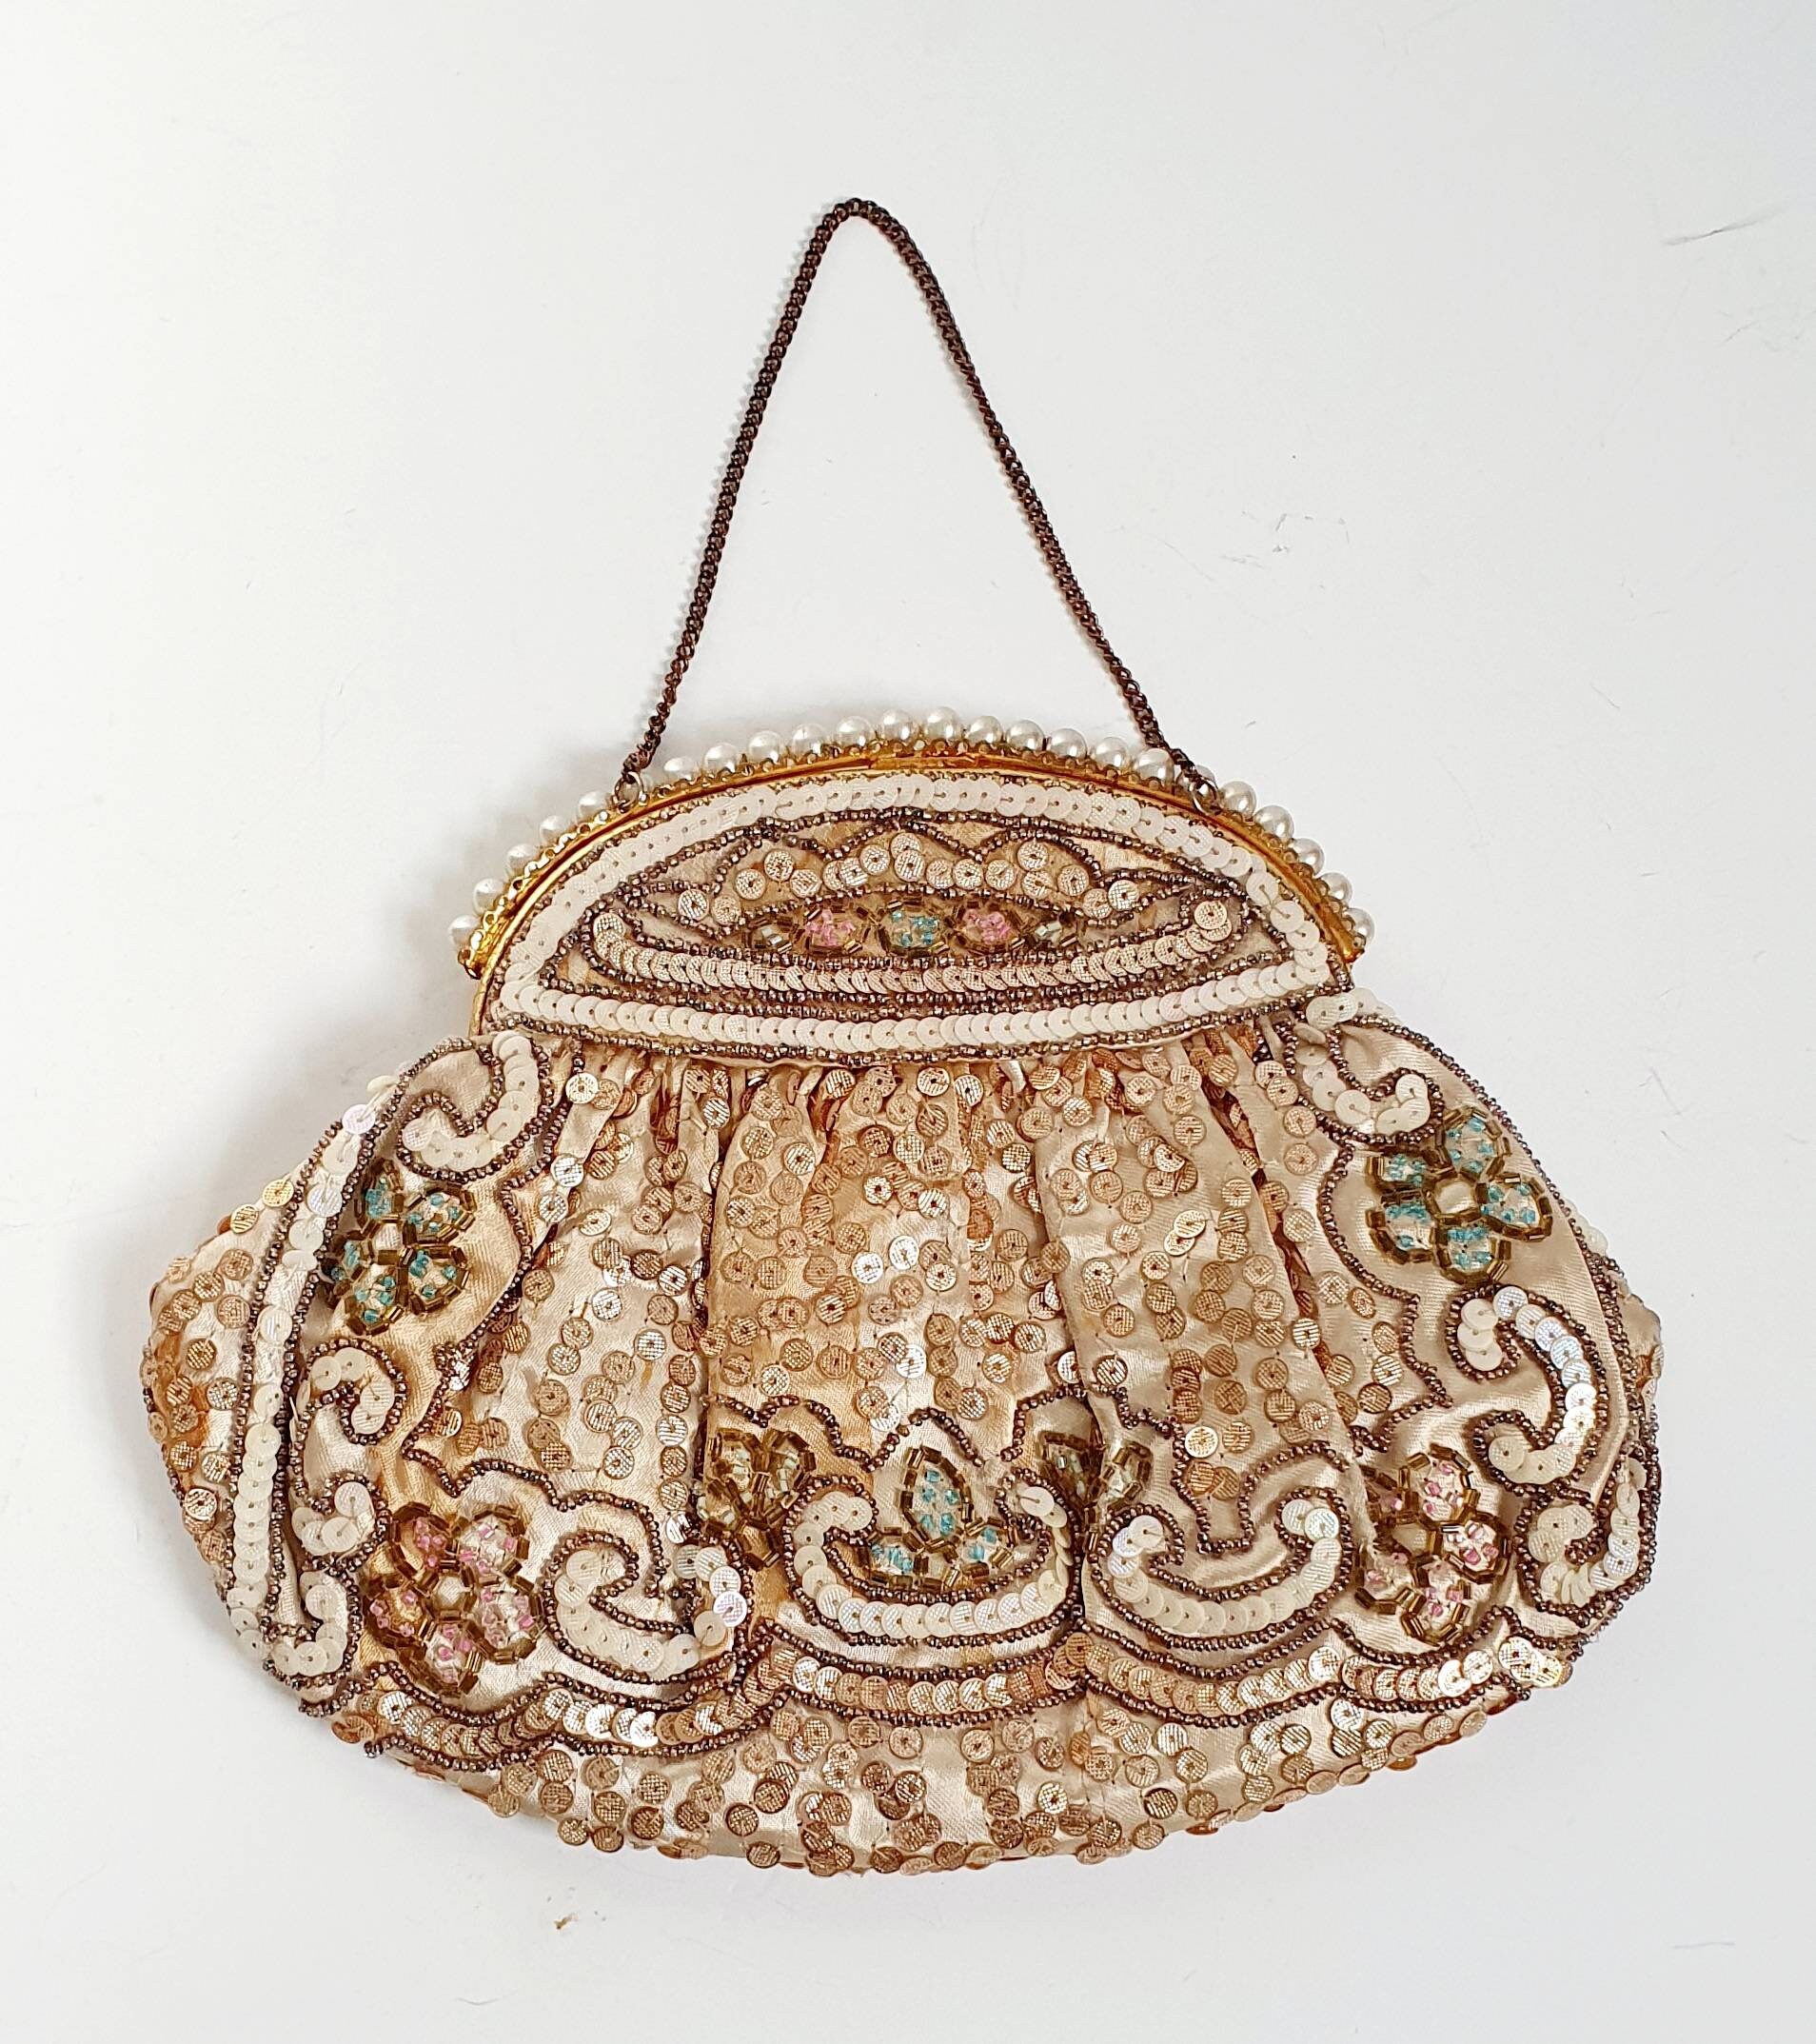 Late 40s/ Early 50s La Regale Sequin and Beaded Bag